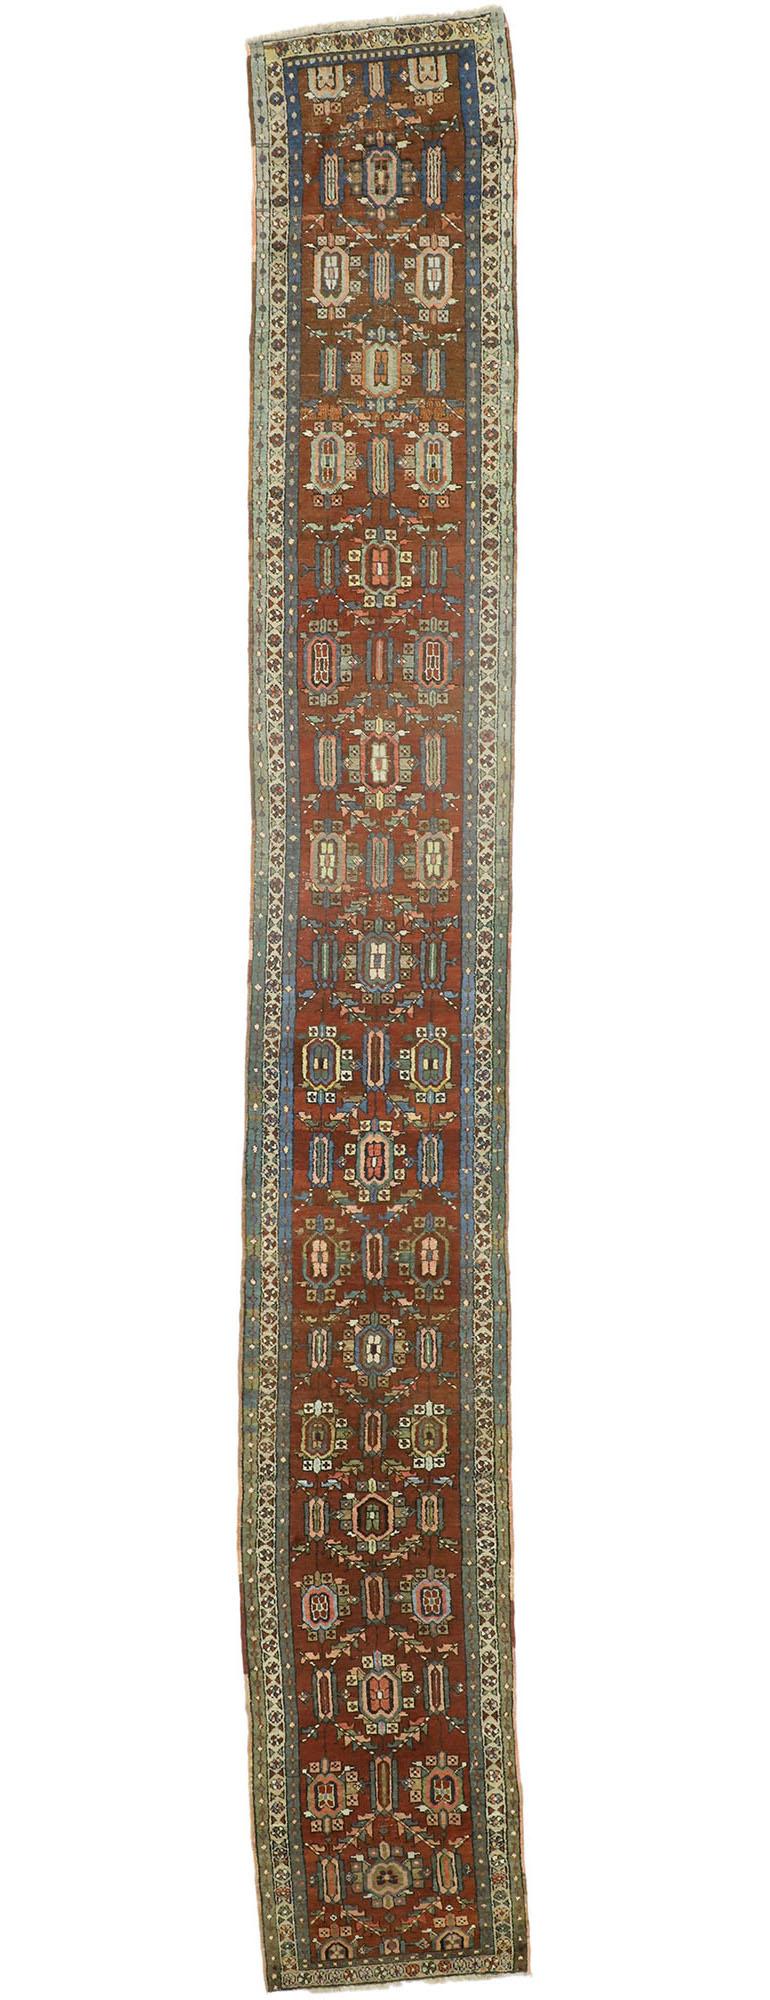 73240 Antique Persian Heriz Runner with Modern Rustic Artisan Style, Extra-Long Runner 02'05 x 17'03. Warm and inviting, this hand-knotted wool distressed antique Persian Heriz runner showcases a modern rustic artisan style. It features an all-over